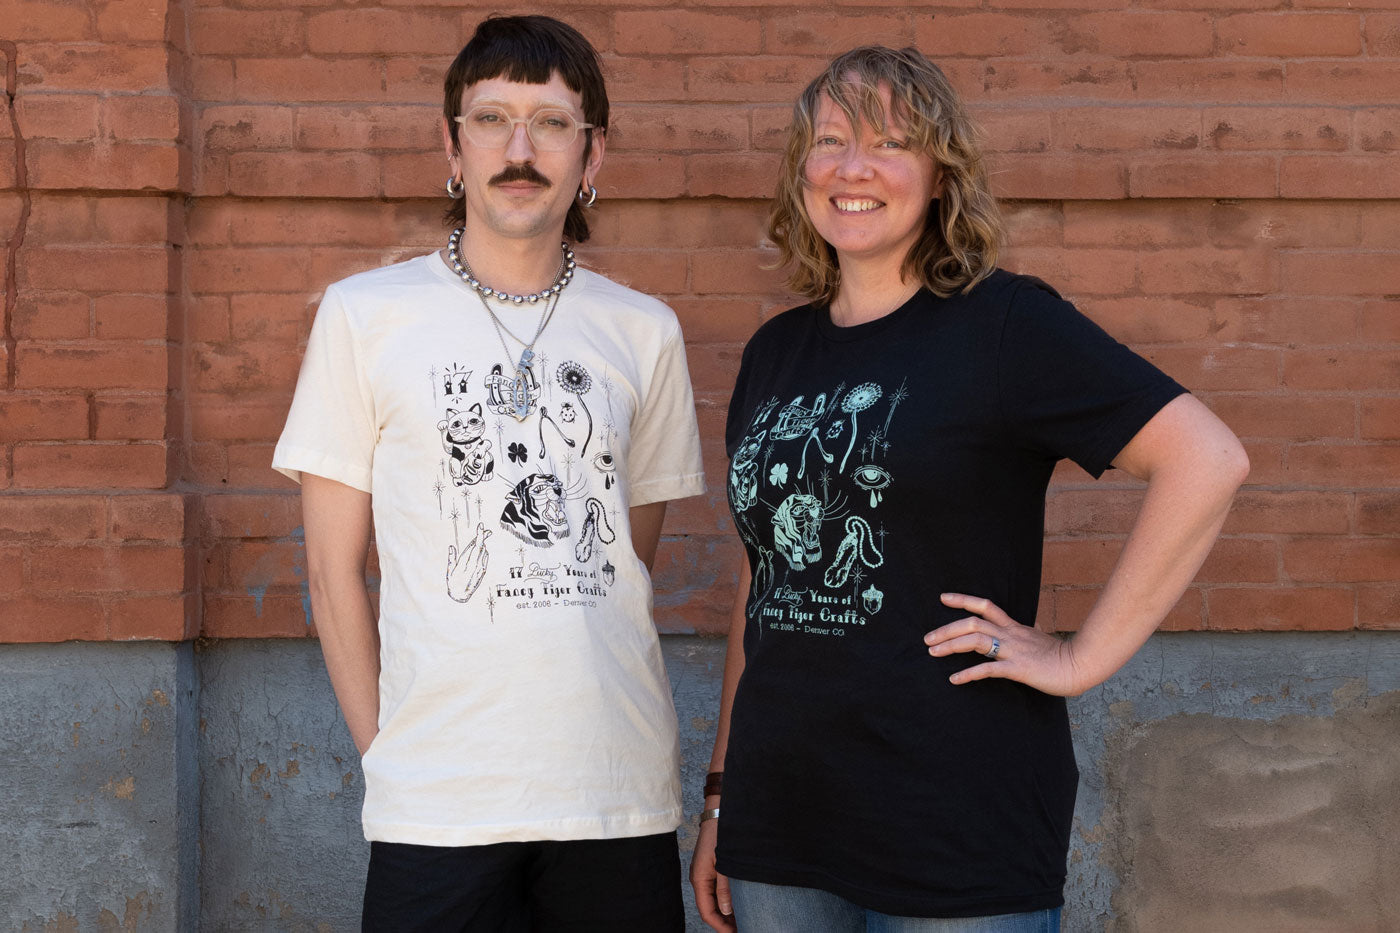 Leaf and Danielle are wearing the 17th Anniversary T-shirts  in front of a brick way. Leaf wears the t-shirt in white while Danielle wears the black colored t-shirt.